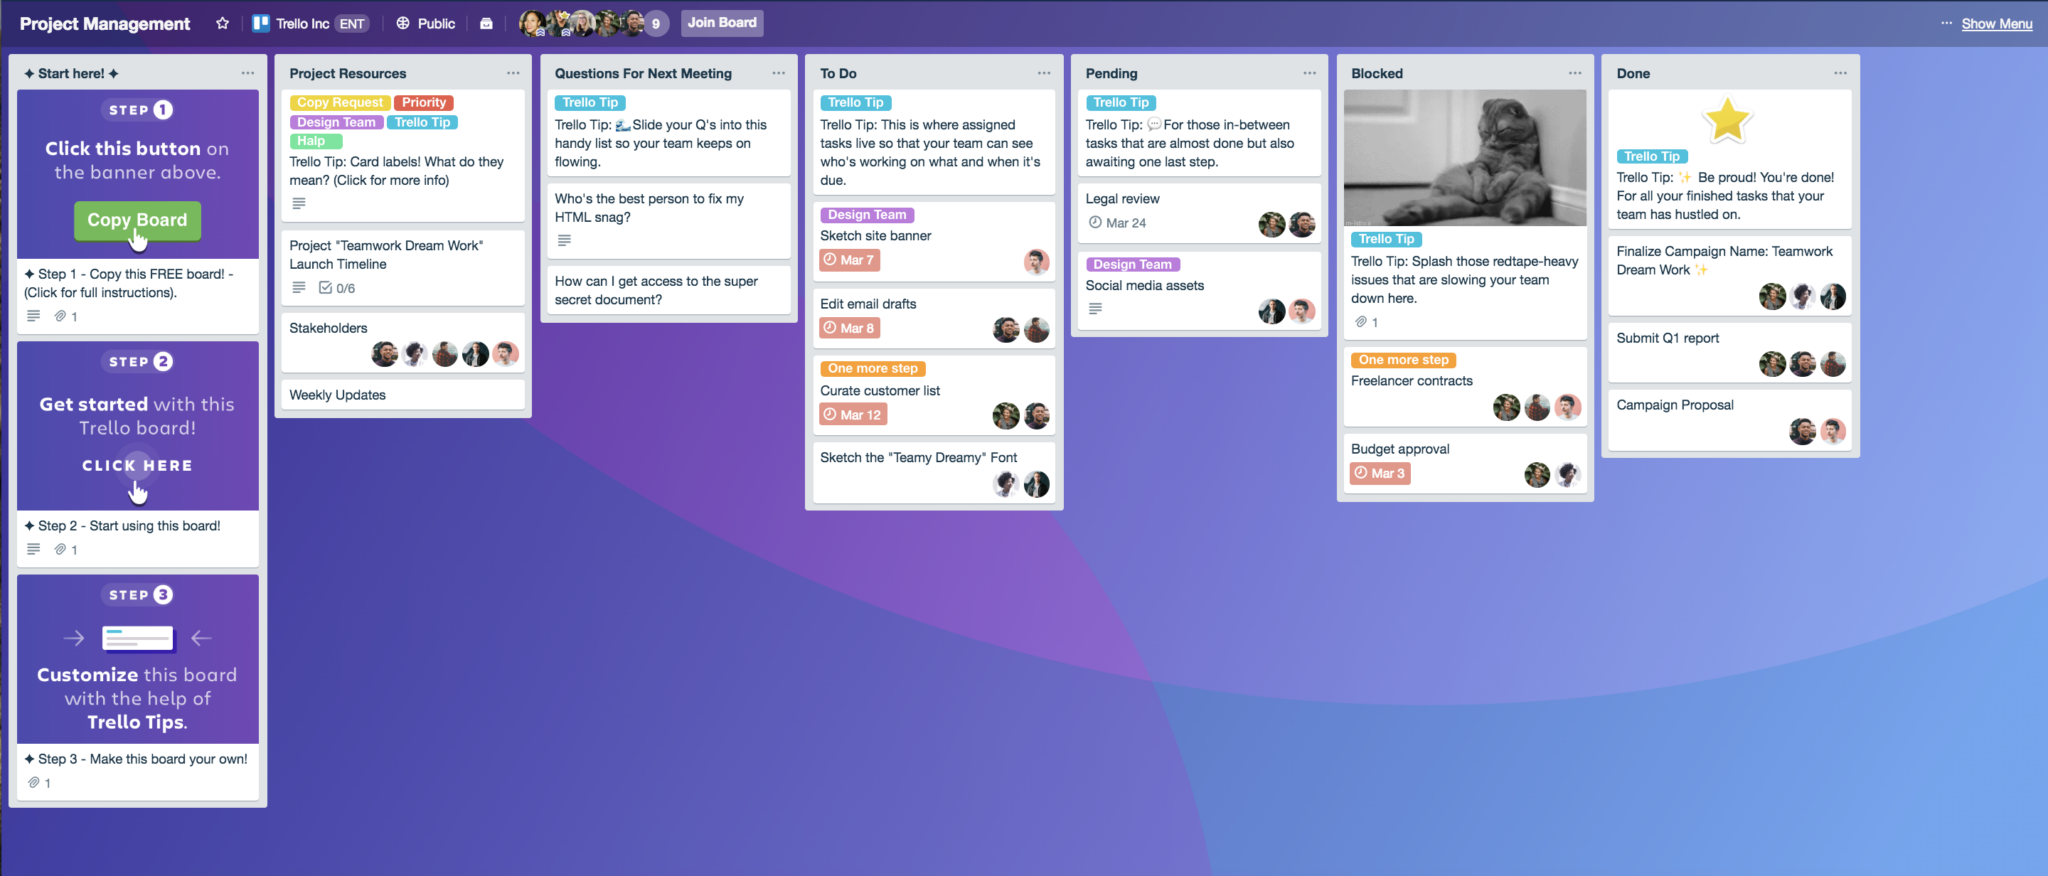 project management workflow in trello board